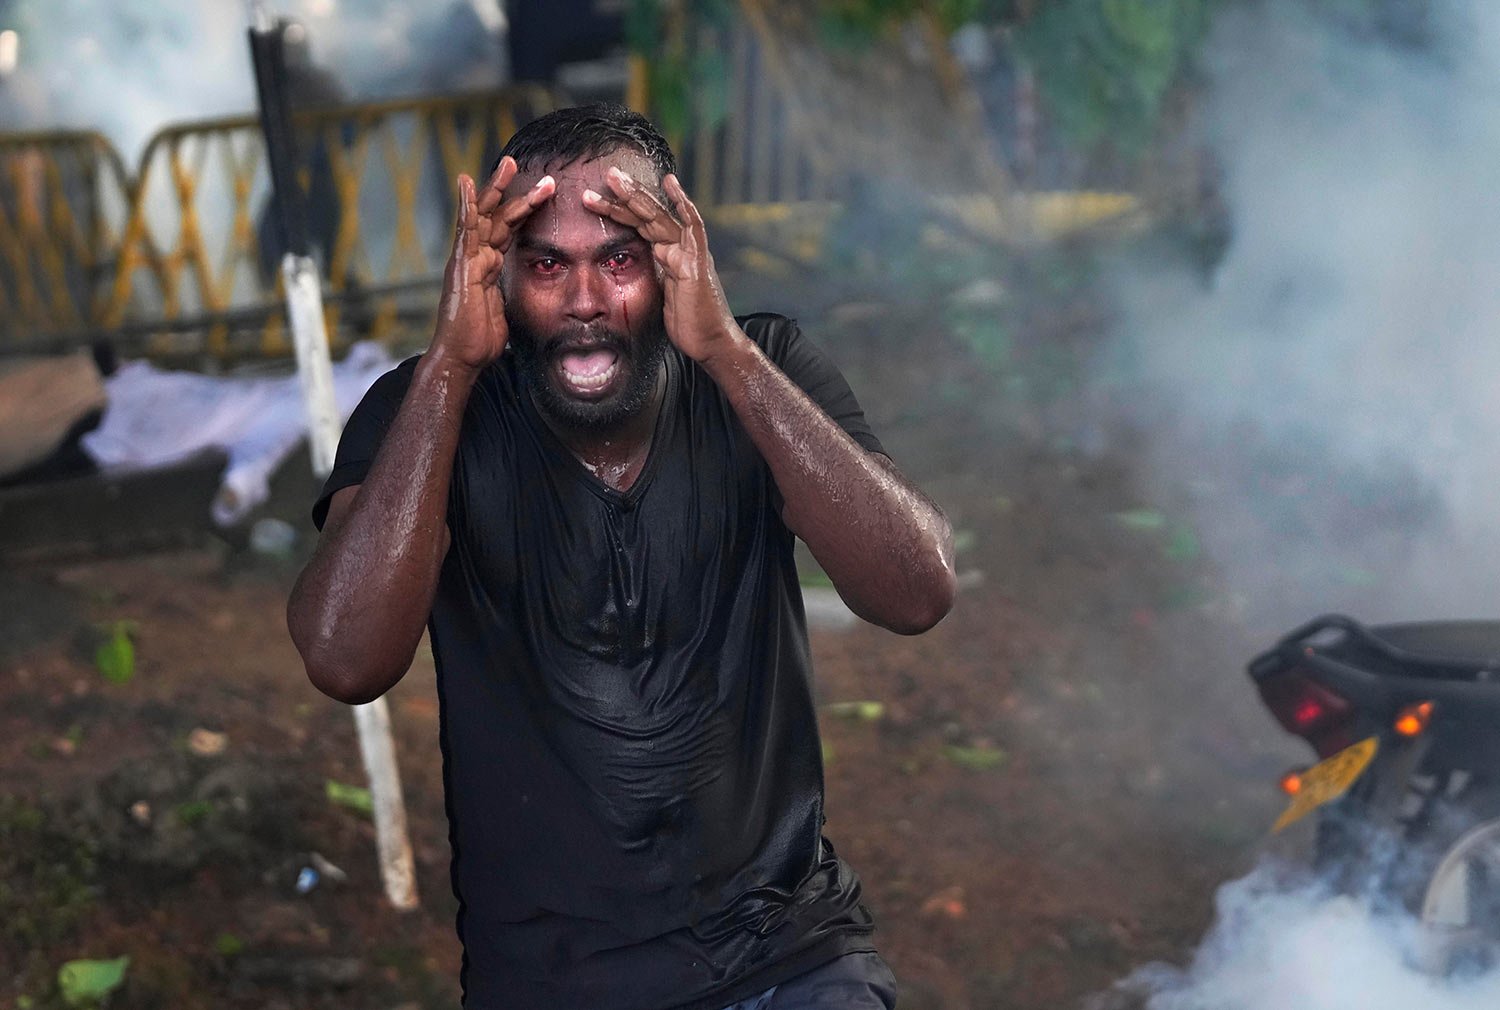  An injured protestor screams in pain as police fire tear gas to disperse protesting members of the Inter University Students Federation during an anti government protest in Colombo, Sri Lanka, Thursday, May 19, 2022. (AP Photo/Eranga Jayawardena) 